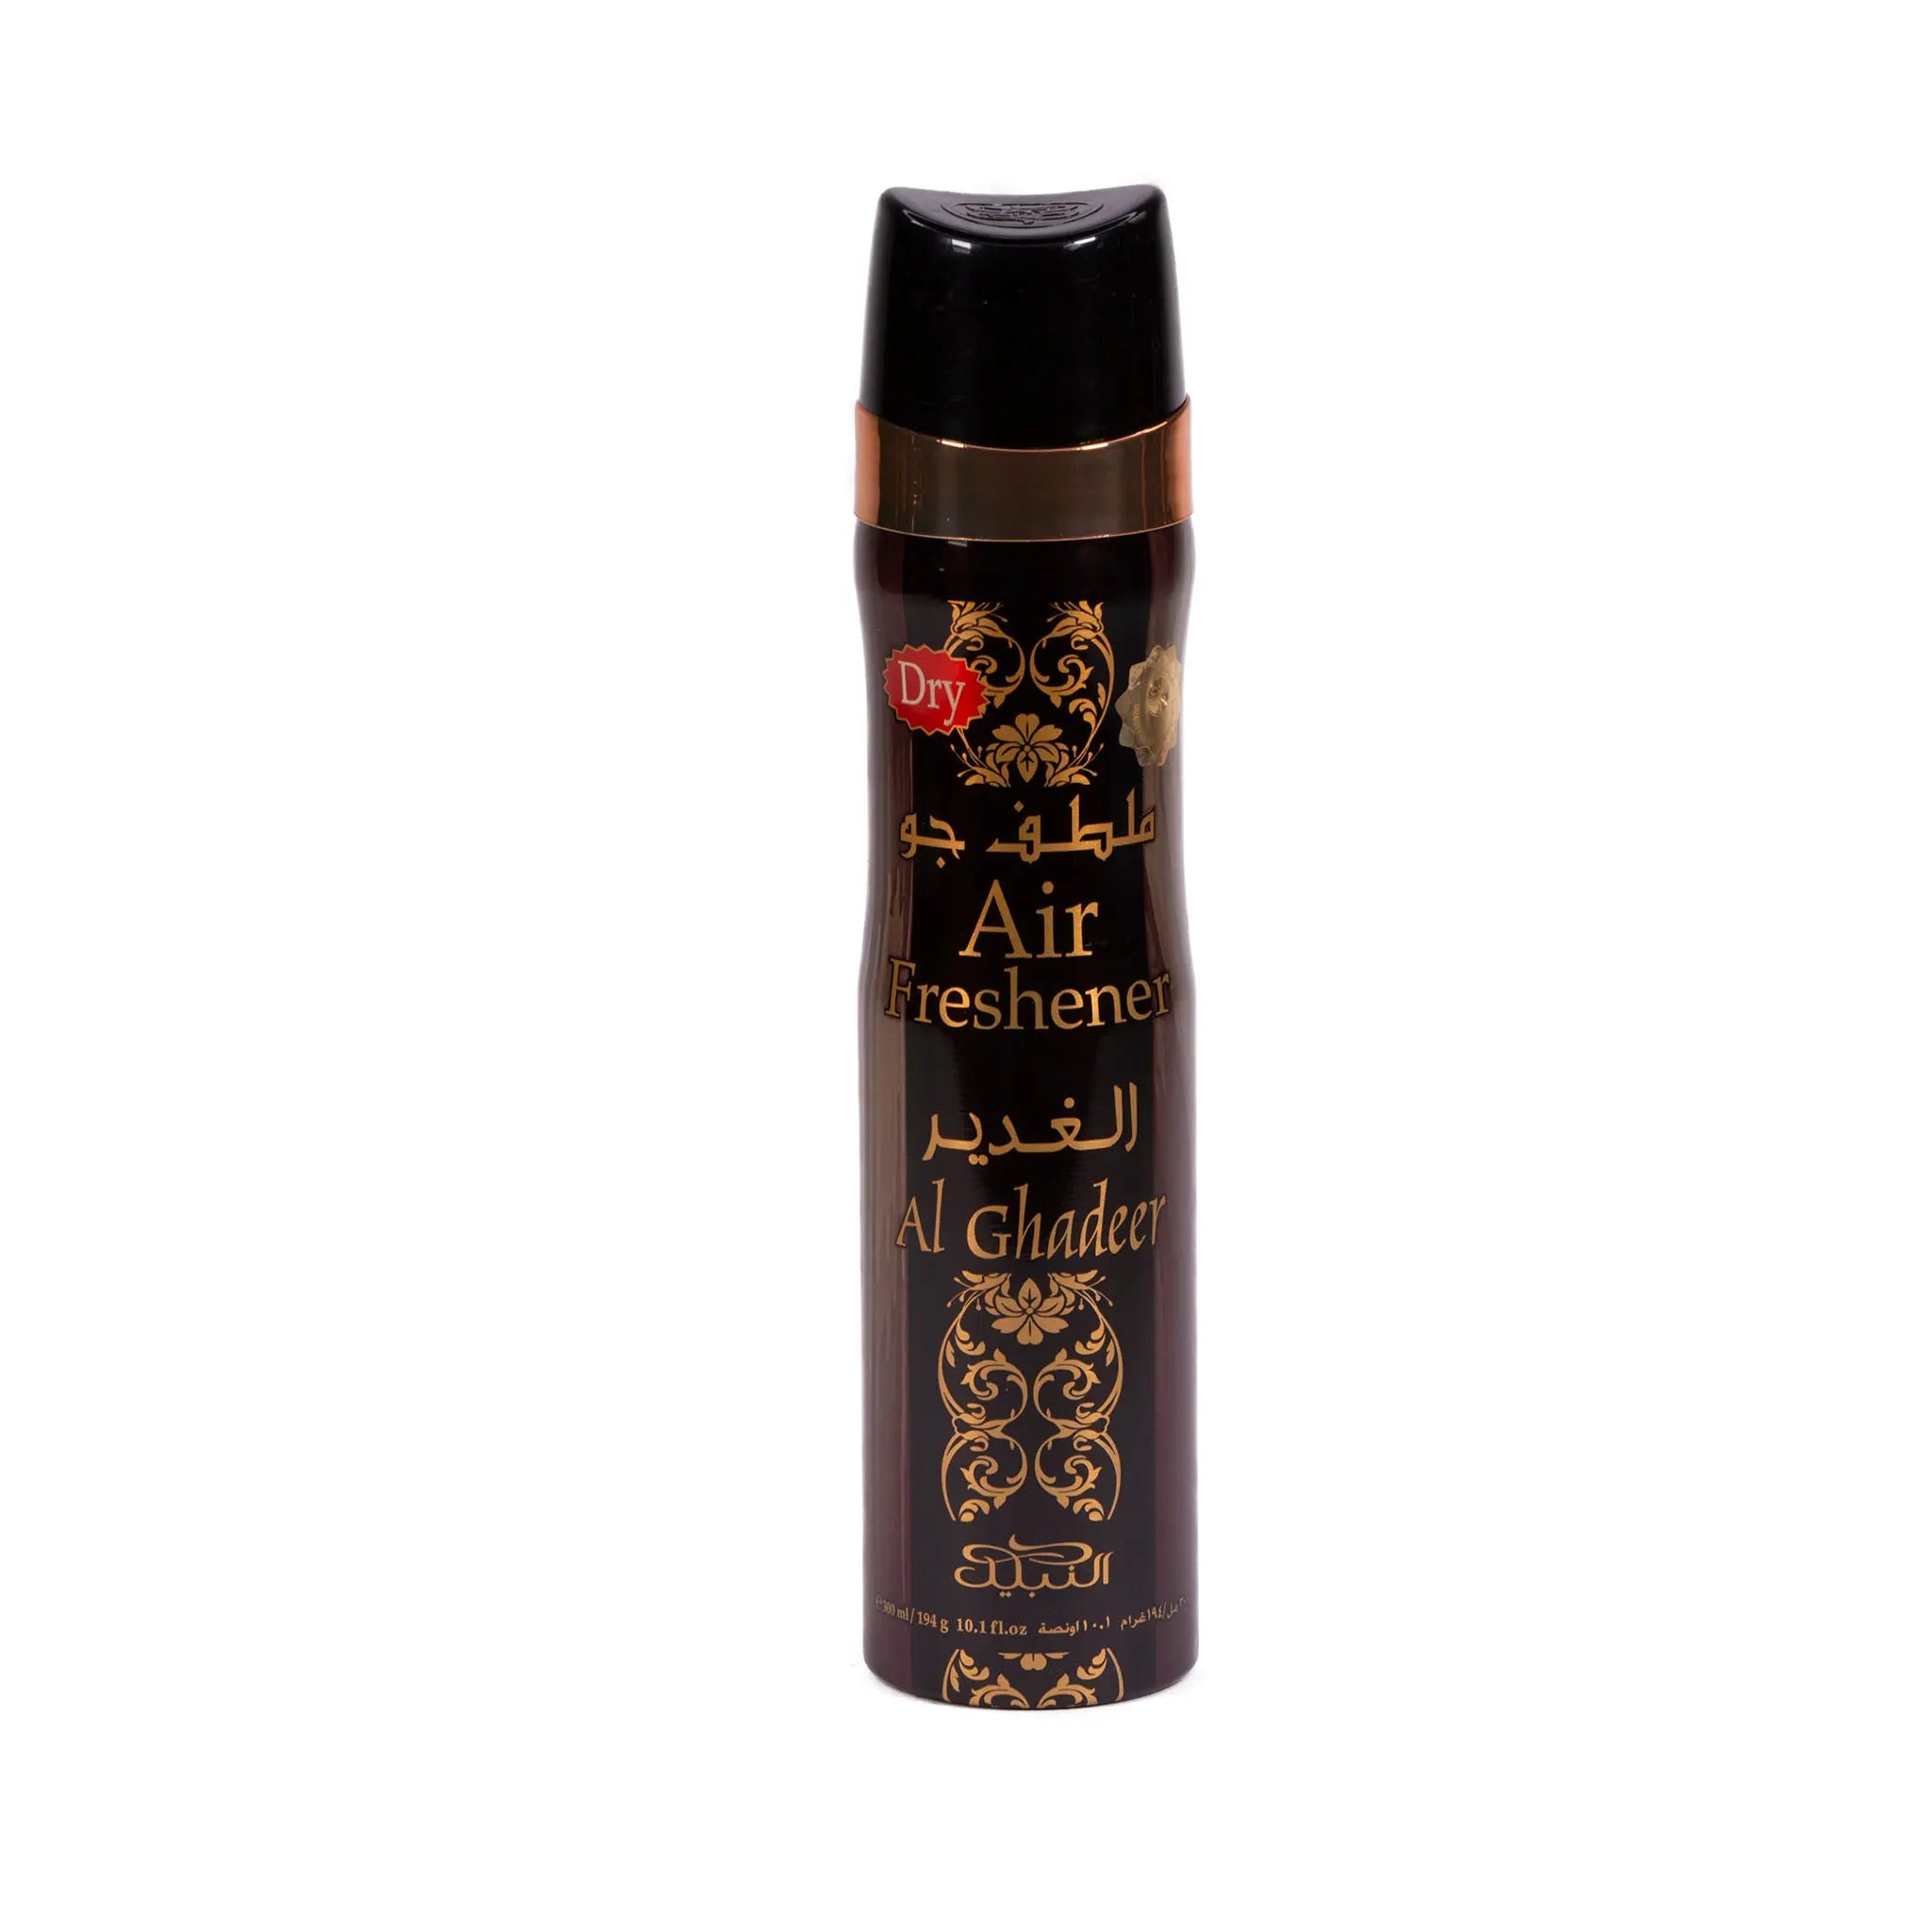 The image displays an air freshener can with a glossy black body and a brown cap. The can has a copper band near the top and features elaborate golden decorative motifs and scrollwork. It has Arabic calligraphy at the top, and below in English it says "Air Freshener" and "Al Ghadeer" in gold lettering. The brand name in Arabic script is also visible at the bottom. The background is plain white, accentuating the can's details and colors.